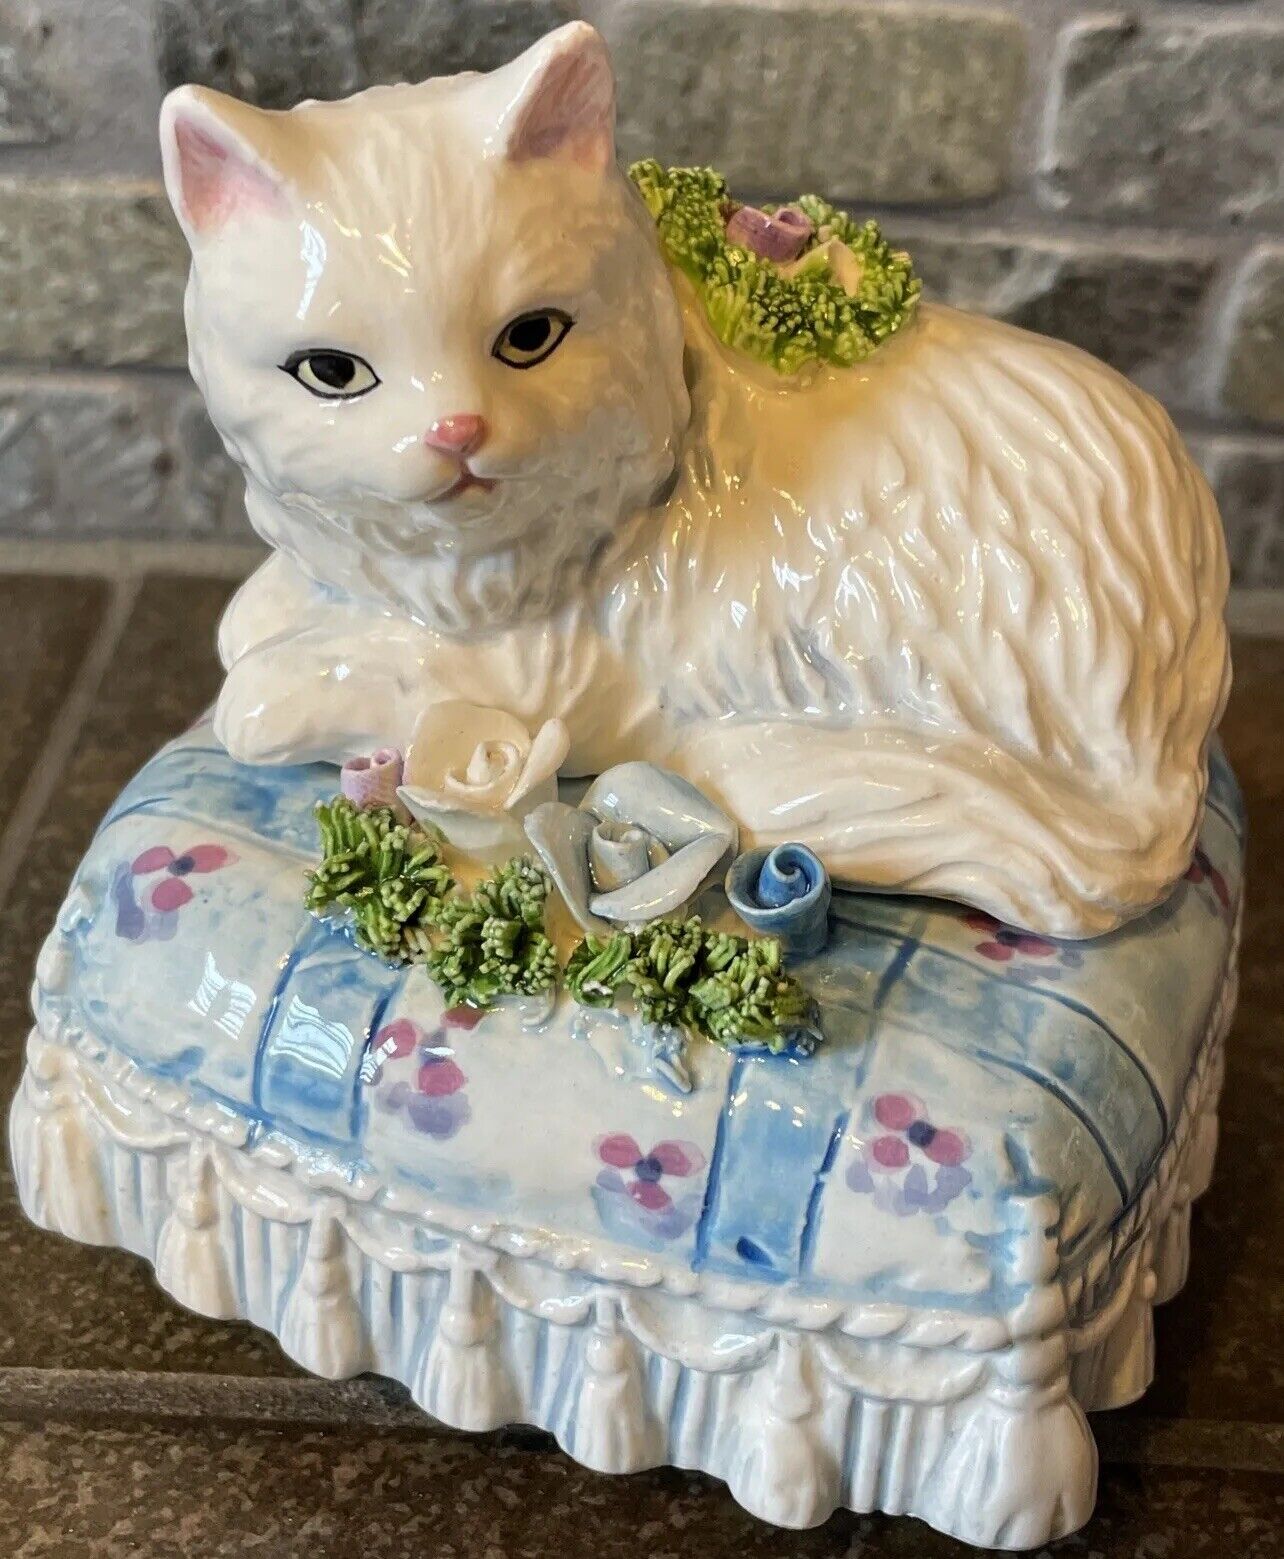 Vintage Schmid Ceramic Cat On Pillow Music Box Plays “Memory” From Cats